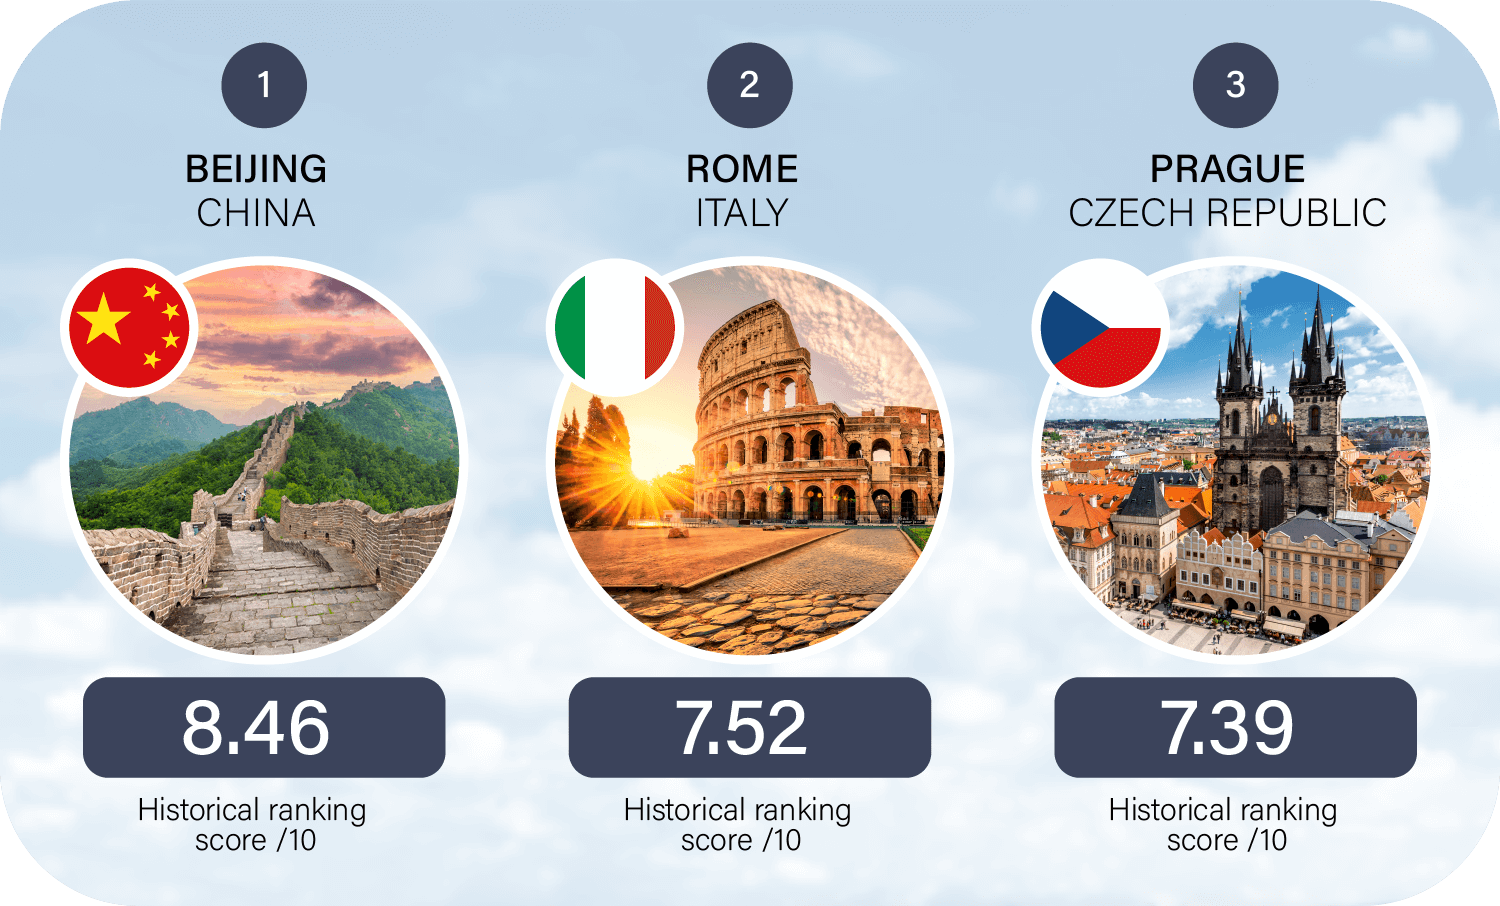 Image showing the top three cities for history buffs: Beijing, Rome and Prague.